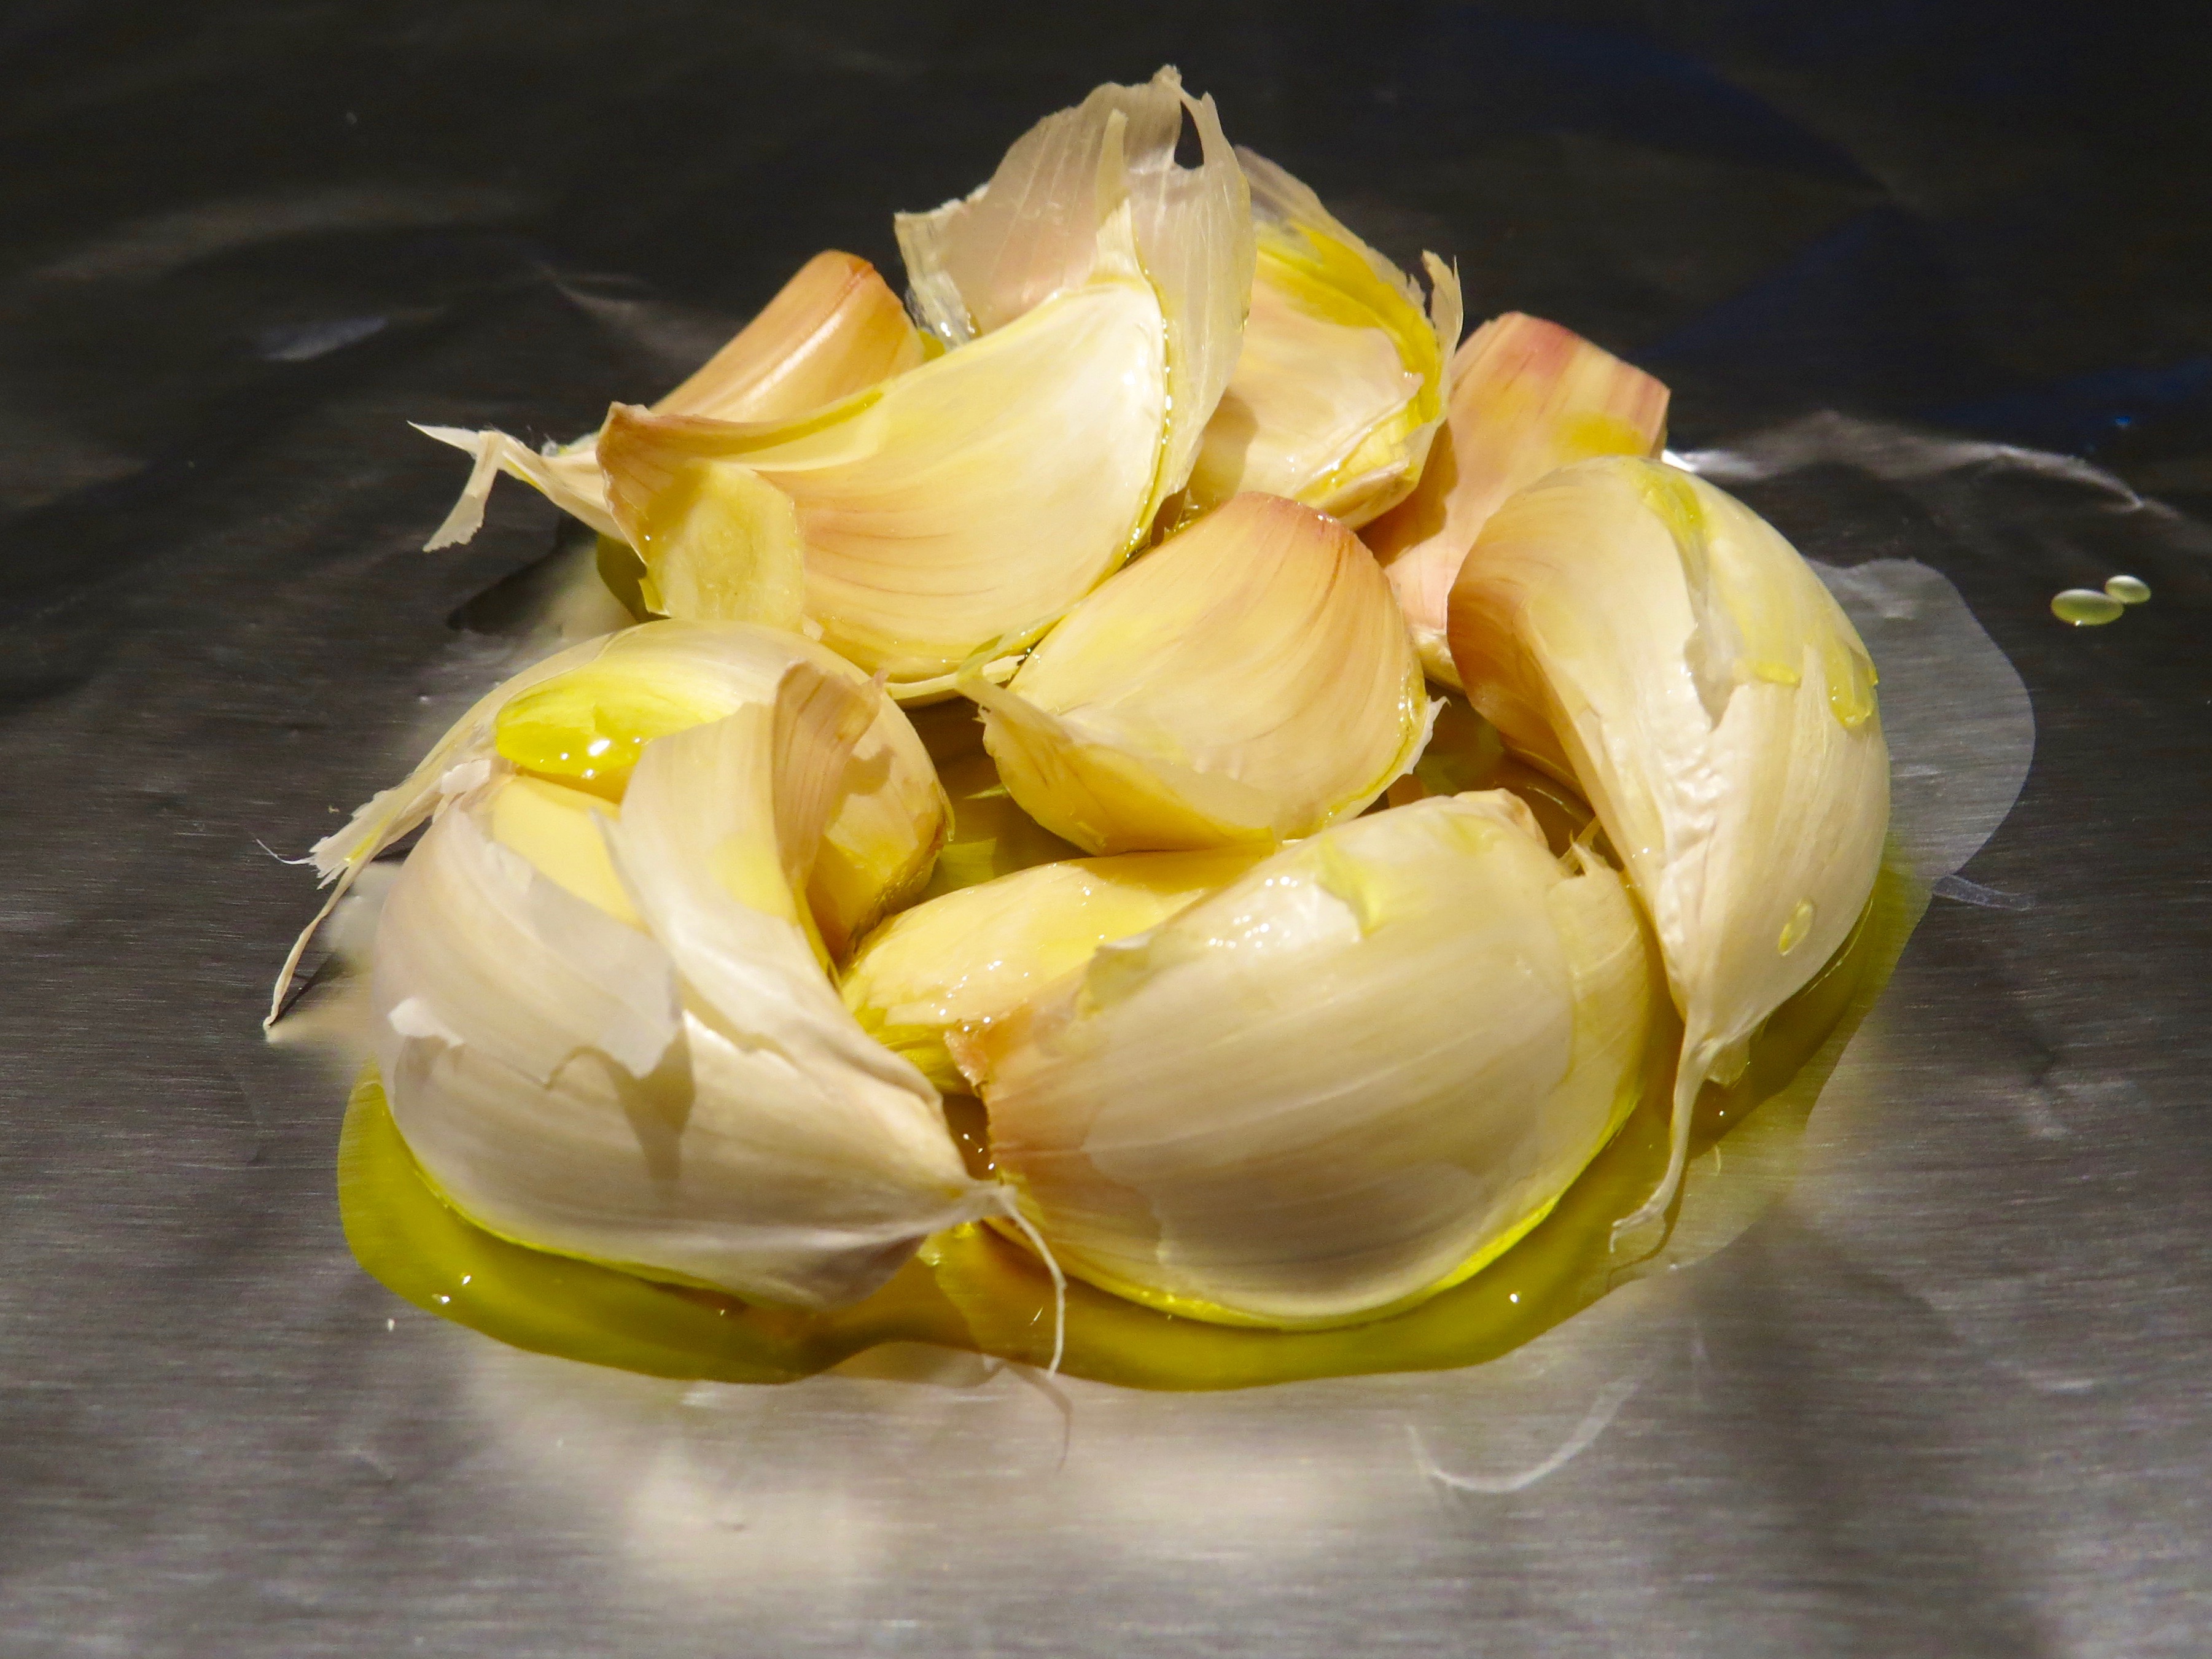 Popping some garlic cloves into the oven, ready to roast. The aroma is sublime.